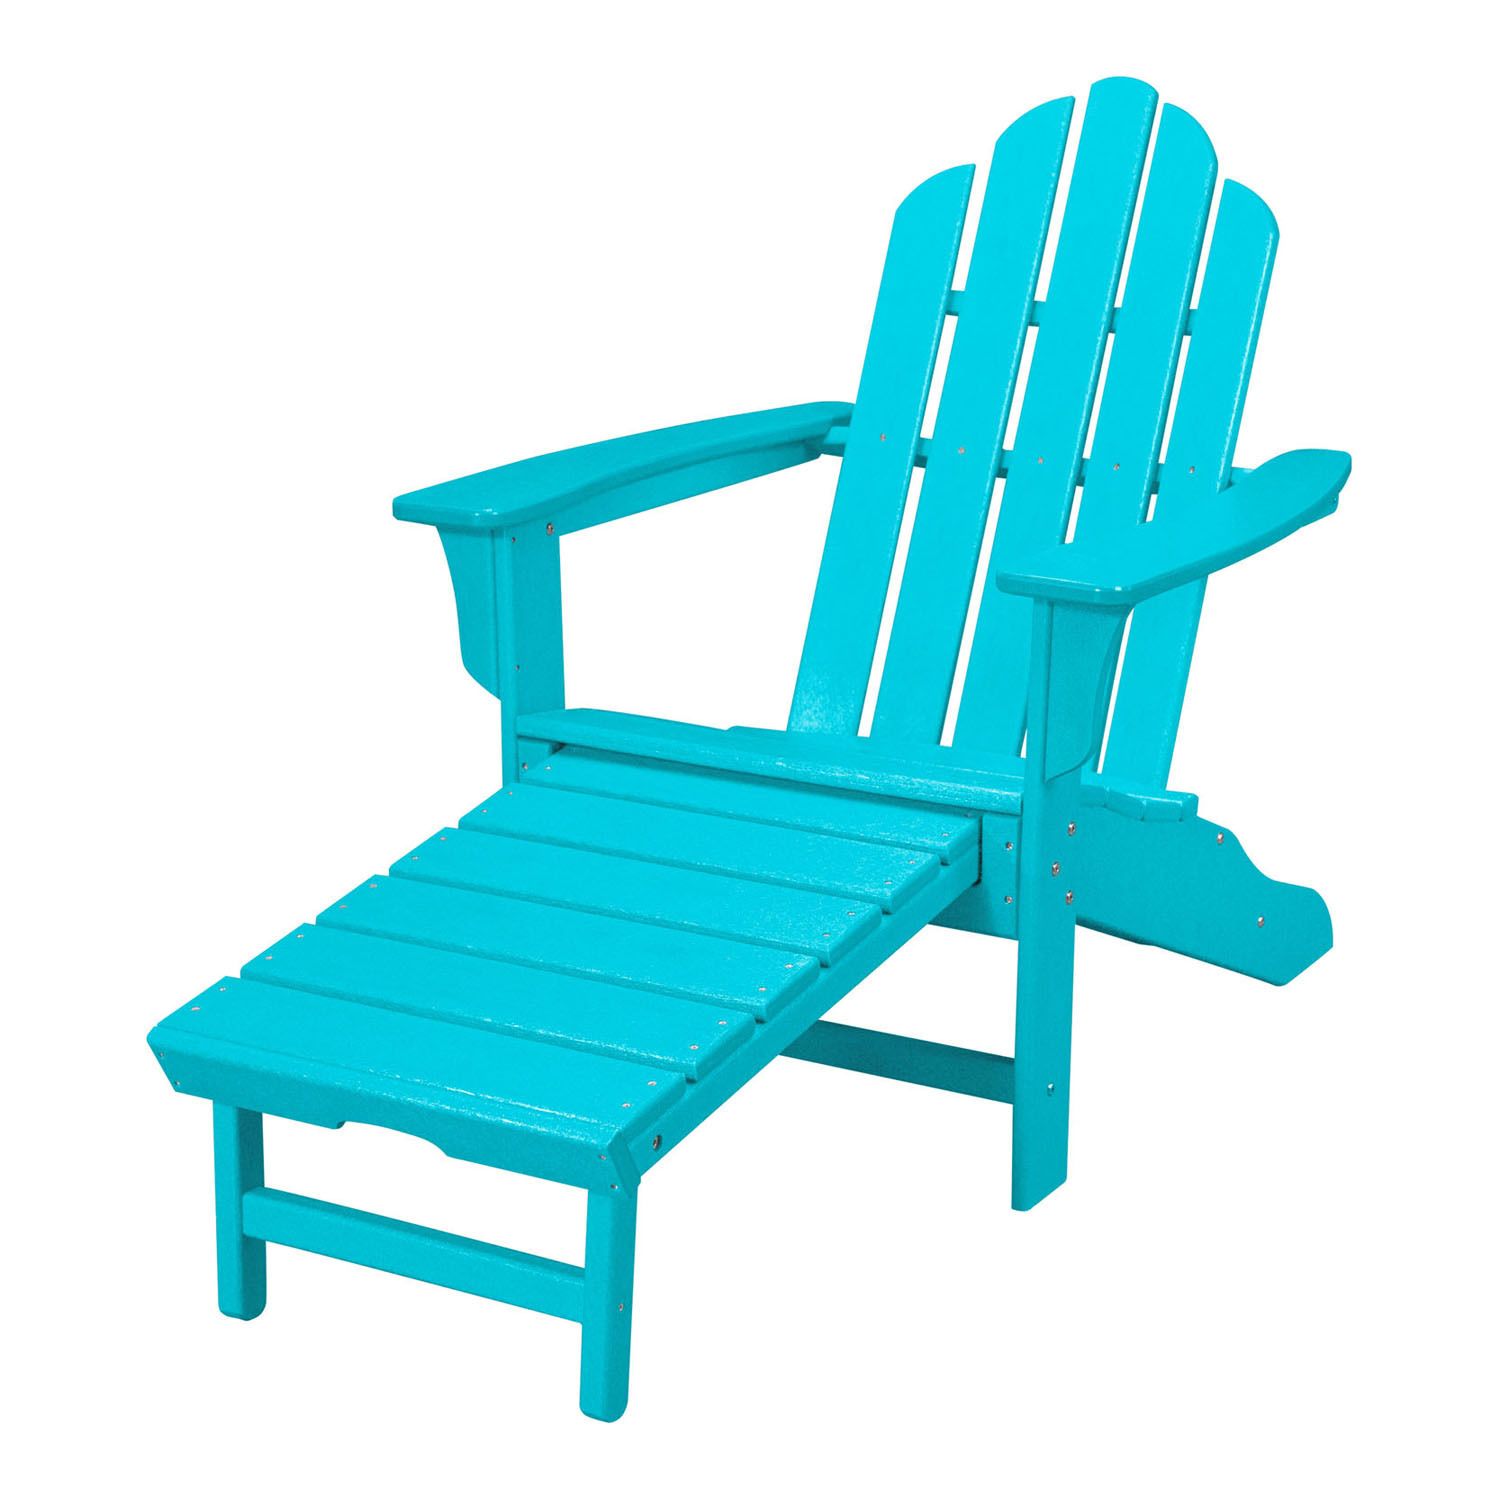 Image for Hanover Accessories All-Weather Contoured Hideaway Ottoman Adirondack Chair at Kohl's.